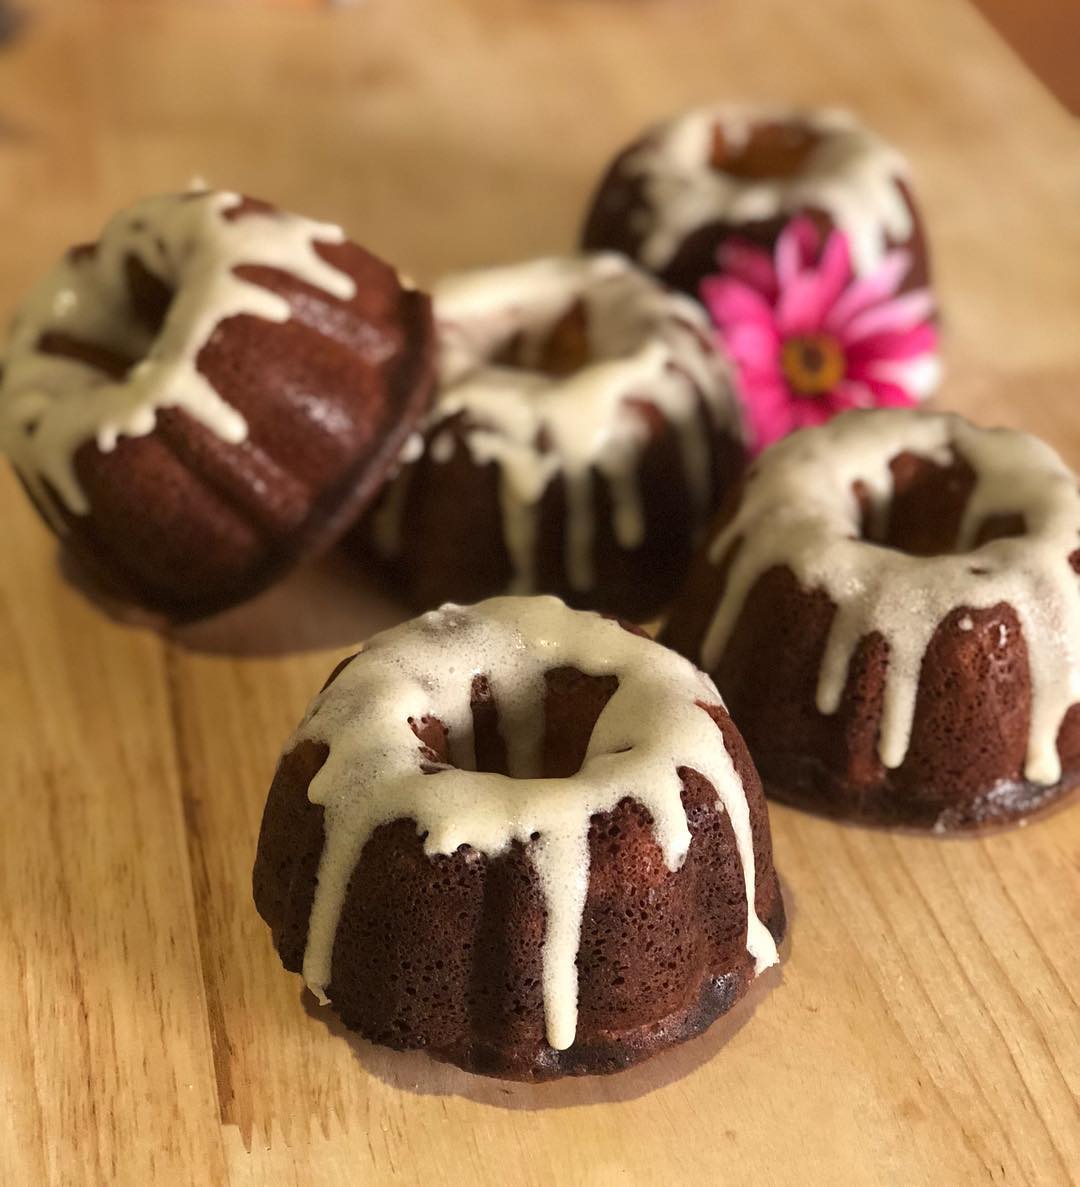 I posted a Lemon Poundcake recipe a few weeks ago from  @the_modified_mama and just had to make these mini bundt cakes with it! Each cake is 2 servings and all my friends LOVE them!!
——
This makes a total of 16 servings of pound cake. Each slice comes out to be 254.19 Calories, 23.4g Fats, 2.49g Net Carbs, and 7.9g Protein.

Don’t be afraid to half the recipe (it makes a lot) or cook in smaller pans and freeze some (just watch cook times). Don’t like lemon, just use vanilla, or almond extract. It comes out JUST like pound cake!!! Pound cake

2 ½ cups almond flour
½ cup unsalted butter, softened
1 ½ cups erythritol
8 whole eggs, room temperature
1 ½ teaspoons vanilla extract
½ teaspoon lemon extract
½ teaspoon salt
8 ounces cream cheese
1 ½ teaspoons baking powder
—
Glaze
–
¼ cup powdered erythritol
3 tablespoons heavy whipping cream
½ teaspoon vanilla extract
—
1. Preheat oven to 350°F. Toss in room temperature butter, softened cream cheese, and erythritol into a mixing bowl.
2. Cream together the butter and erythritol until smooth. Then, add in softened chunks of cream cheese and blend together until smooth
3. Add in the eggs, lemon extract,and vanilla extract in with the blended ingredients. Blend with a hand mixer until smooth.
4. In a medium sized bowl: mix together the almond flour, baking powder, and salt.
5. Slowly add in the ingredients from the medium sized bowl into the batter. Use a hand blender to blend the clumps until very smooth.
6. Pour batter into a loaf pan.  Bake for 60 – 120 minutes at 350F or until smooth in the middle when tested with a toothpick.  If creating a glaze: blend together the powdered erythritol, vanilla extract, and heavy whipping cream until smooth. Wait until the pound cake is fully cooled from the oven before spreading the glaze on top